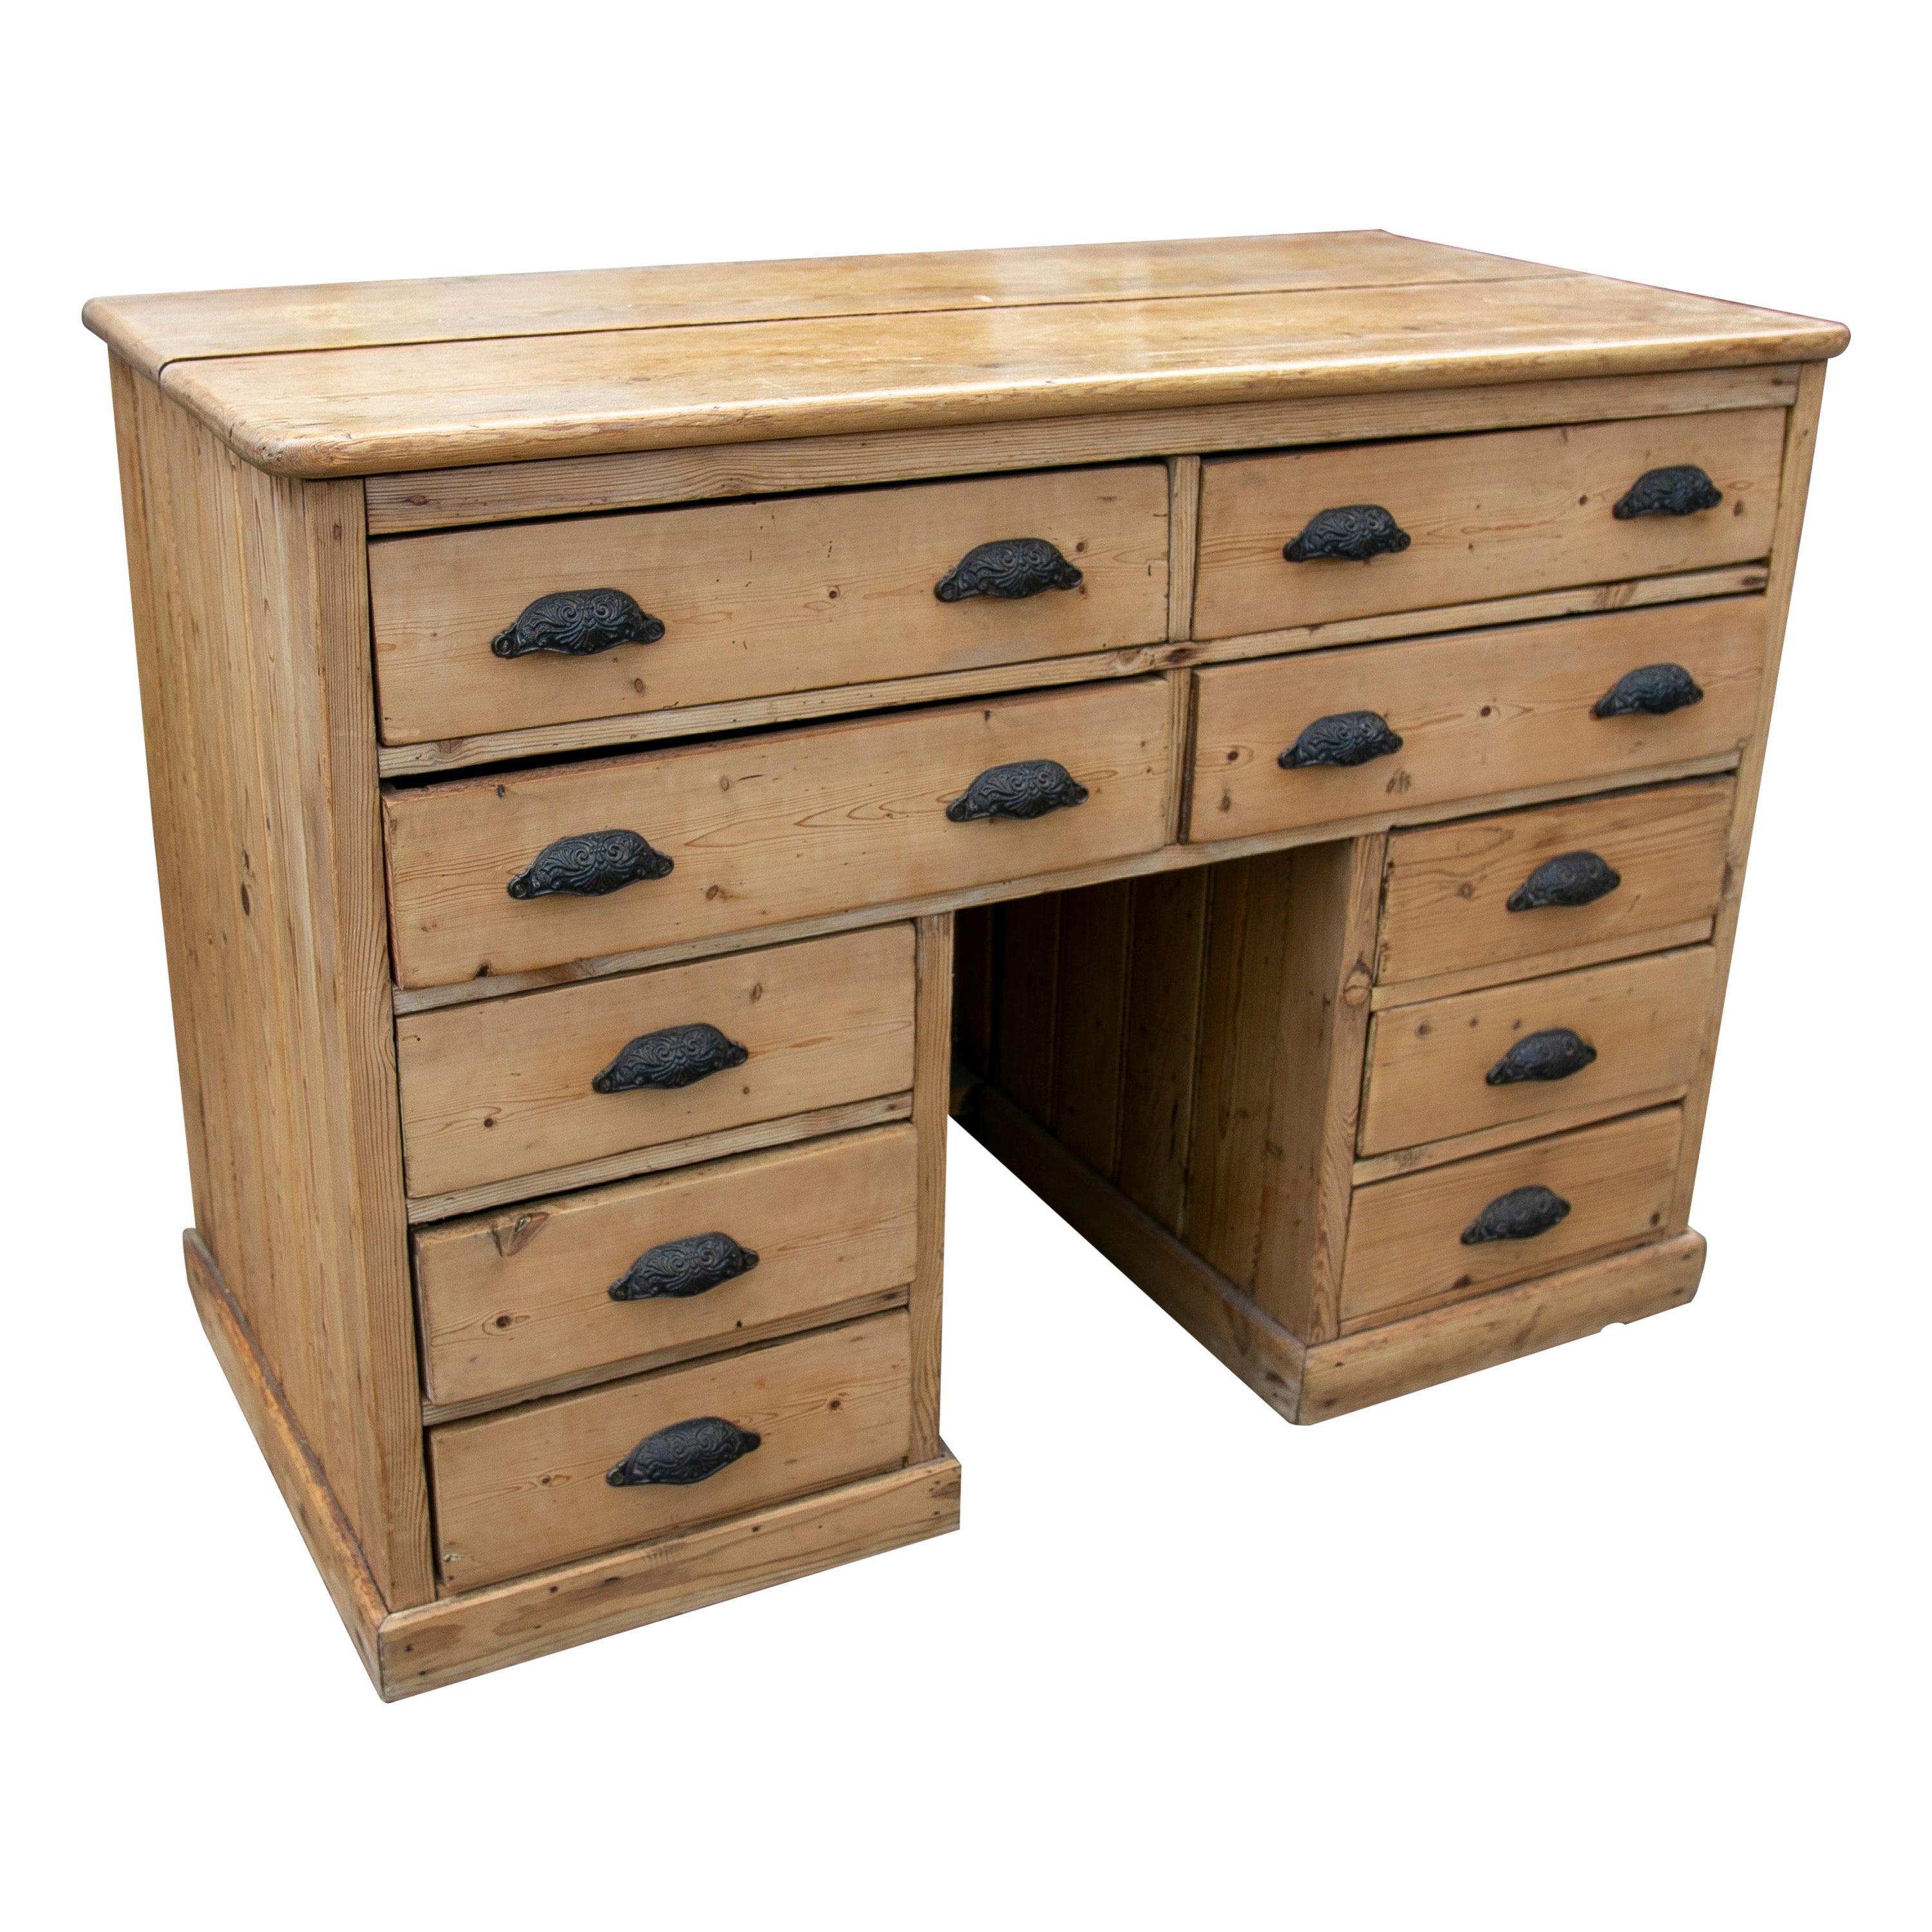 Spanish Wooden Desk with Ten Drawers and Iron Pulls For Sale